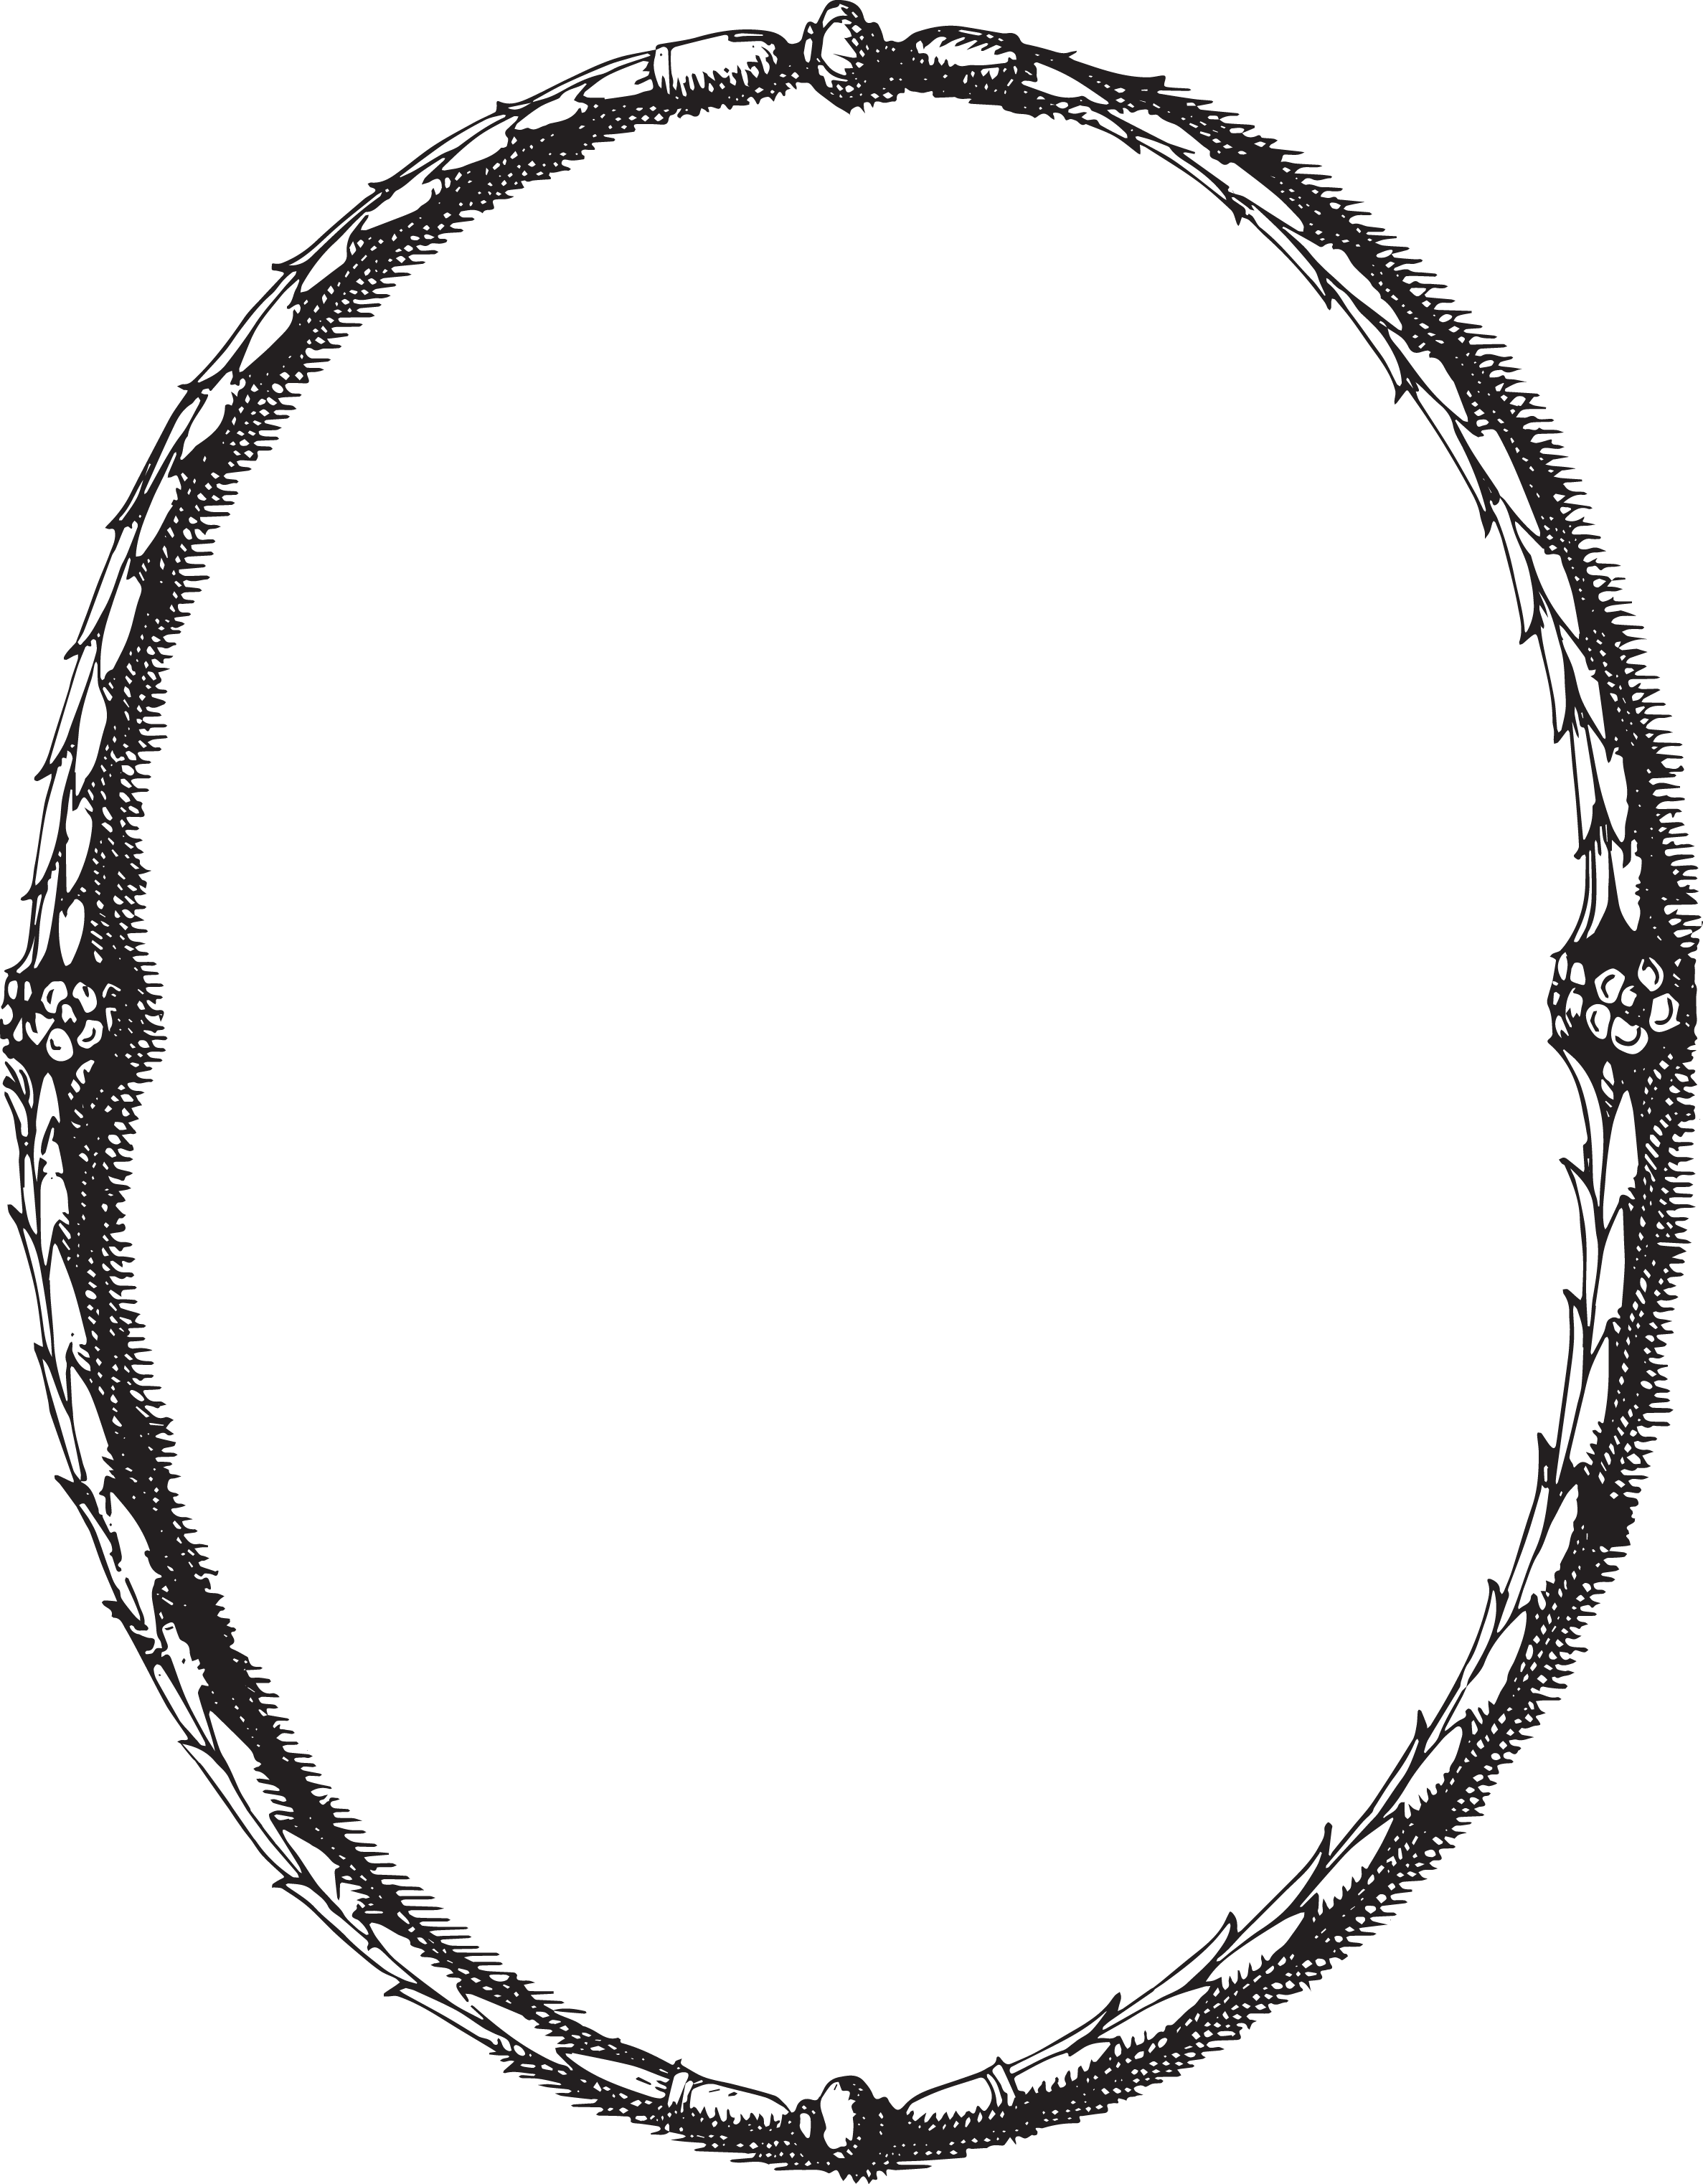 Antique oval frame clipart 